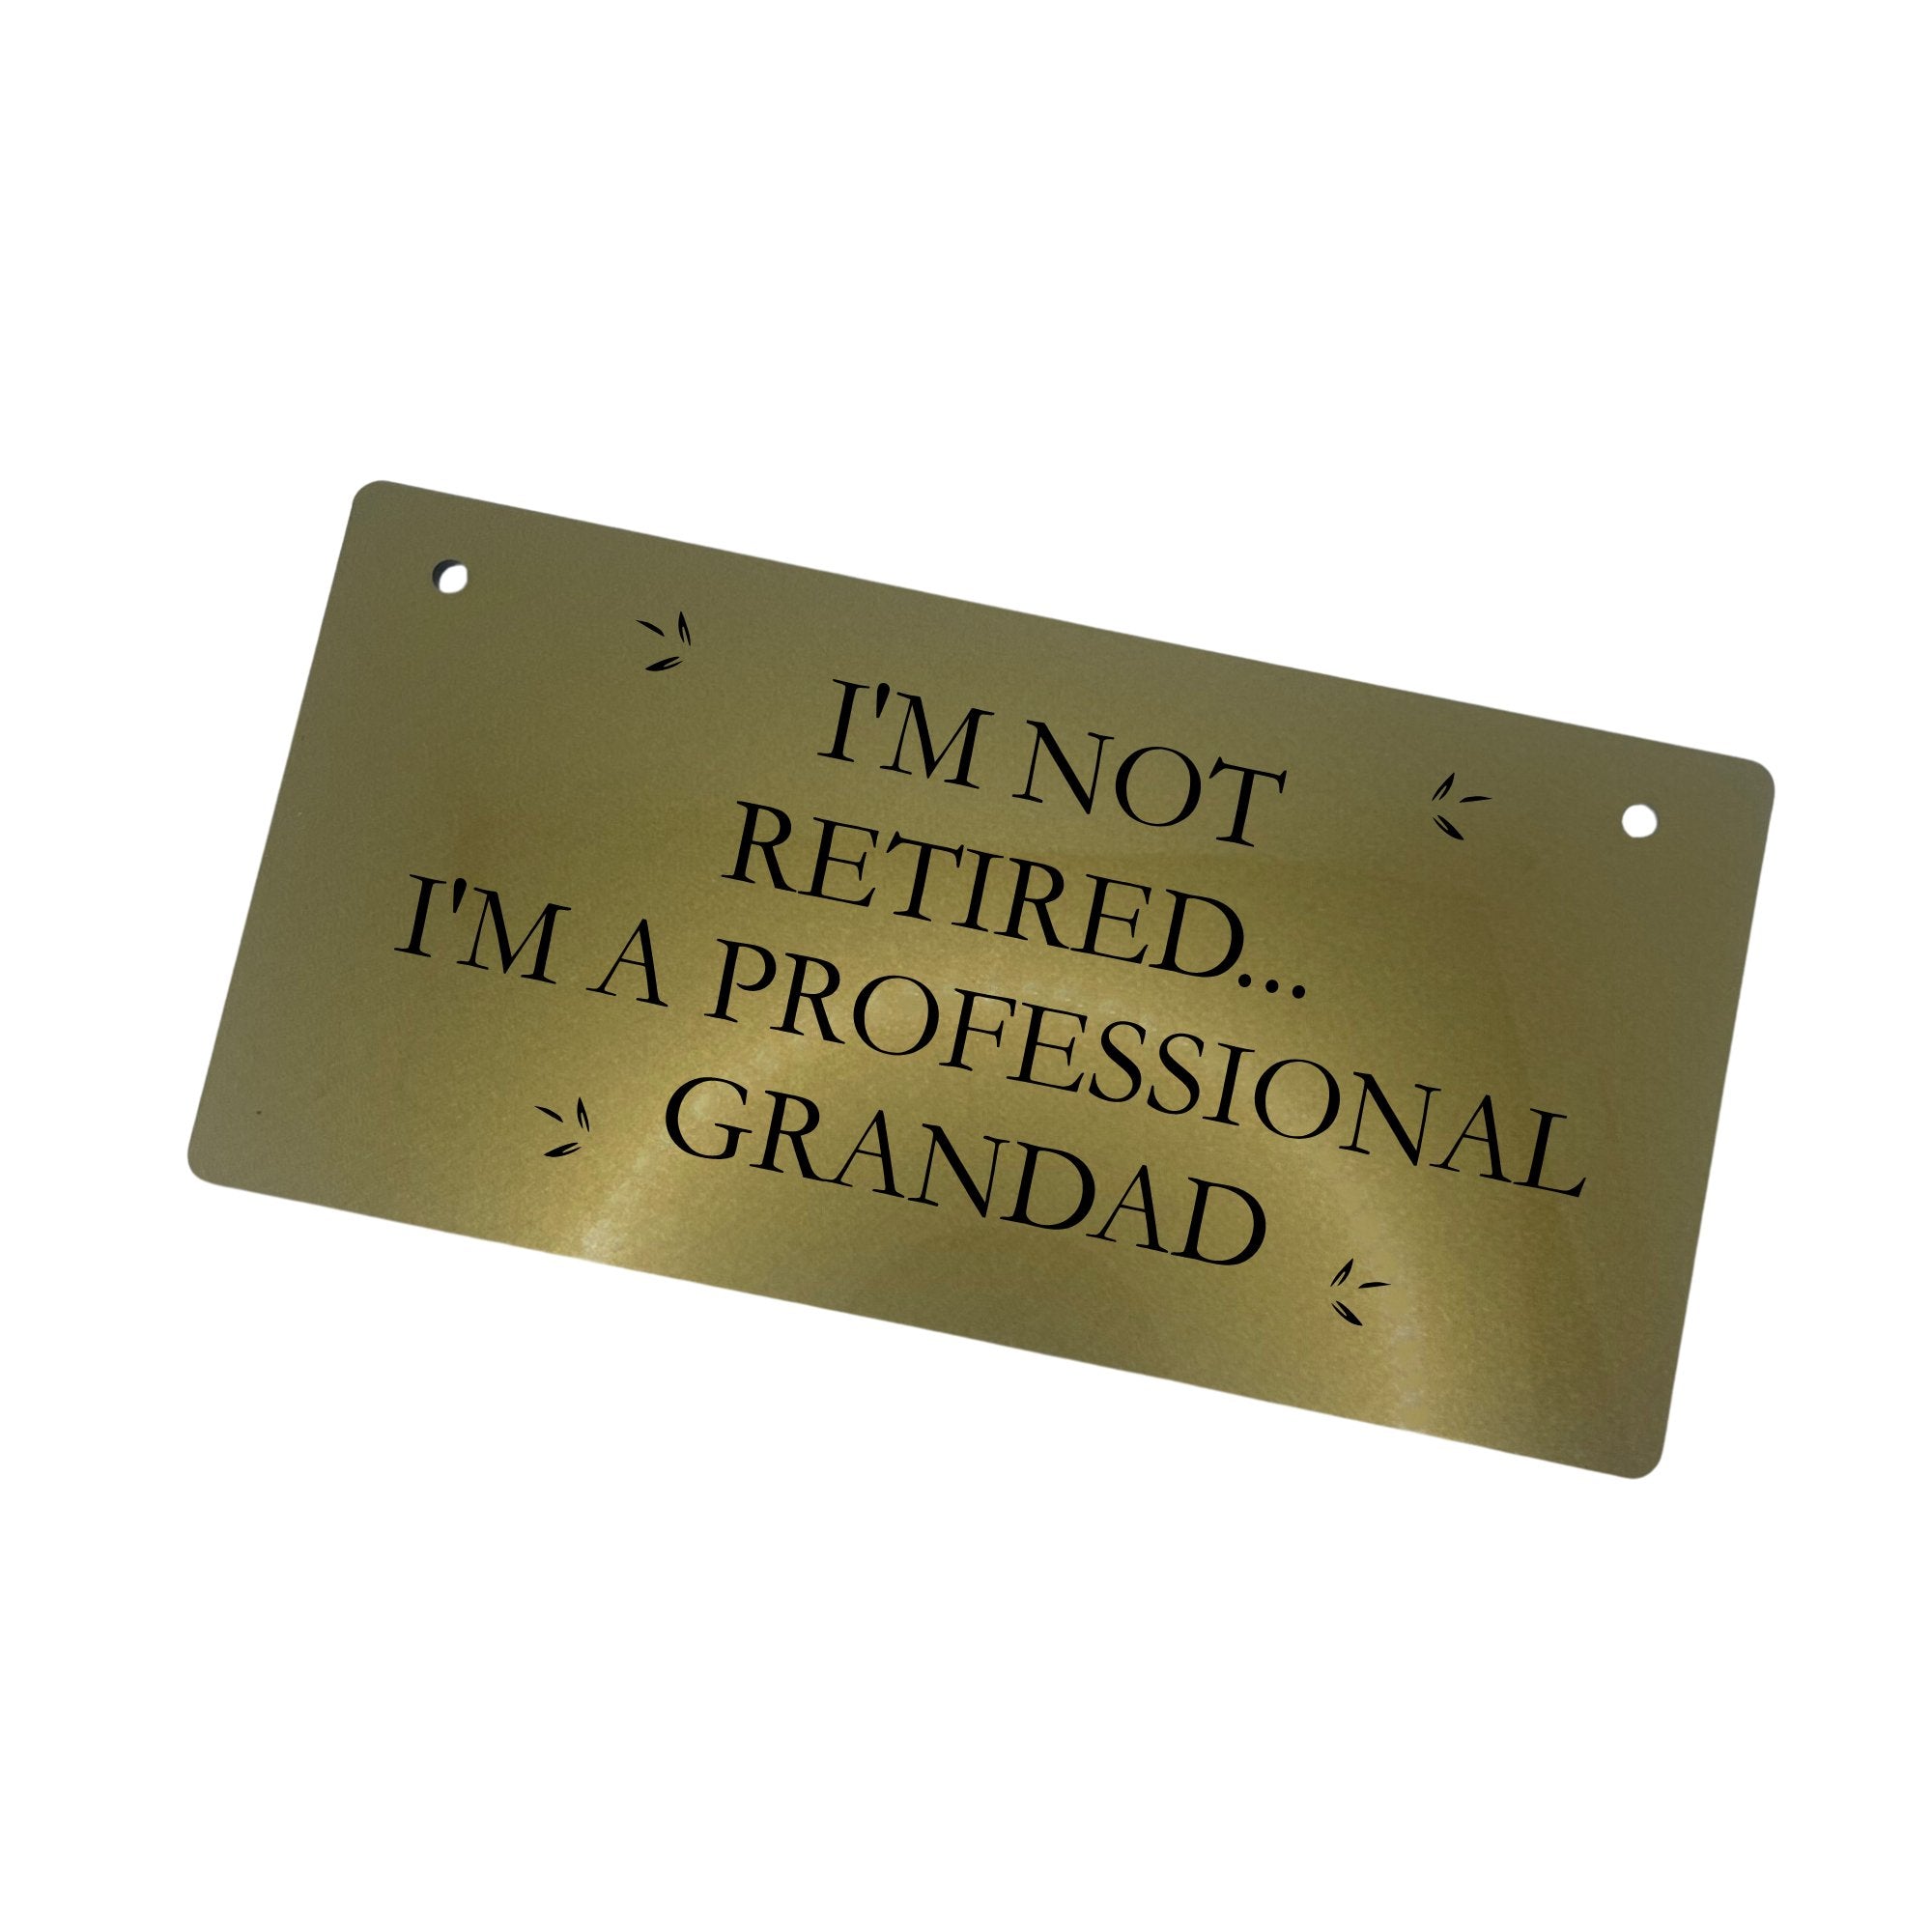 Gold Personalized Engraved Sign for Grandads - Custom Acrylic Sign with 'I Am Not Retired, I Am a Professional Grandad' Phrase - High-Quality 3mm Acrylic - Waterproof and Durable - Ideal Gift for Father's Day and Birthdays